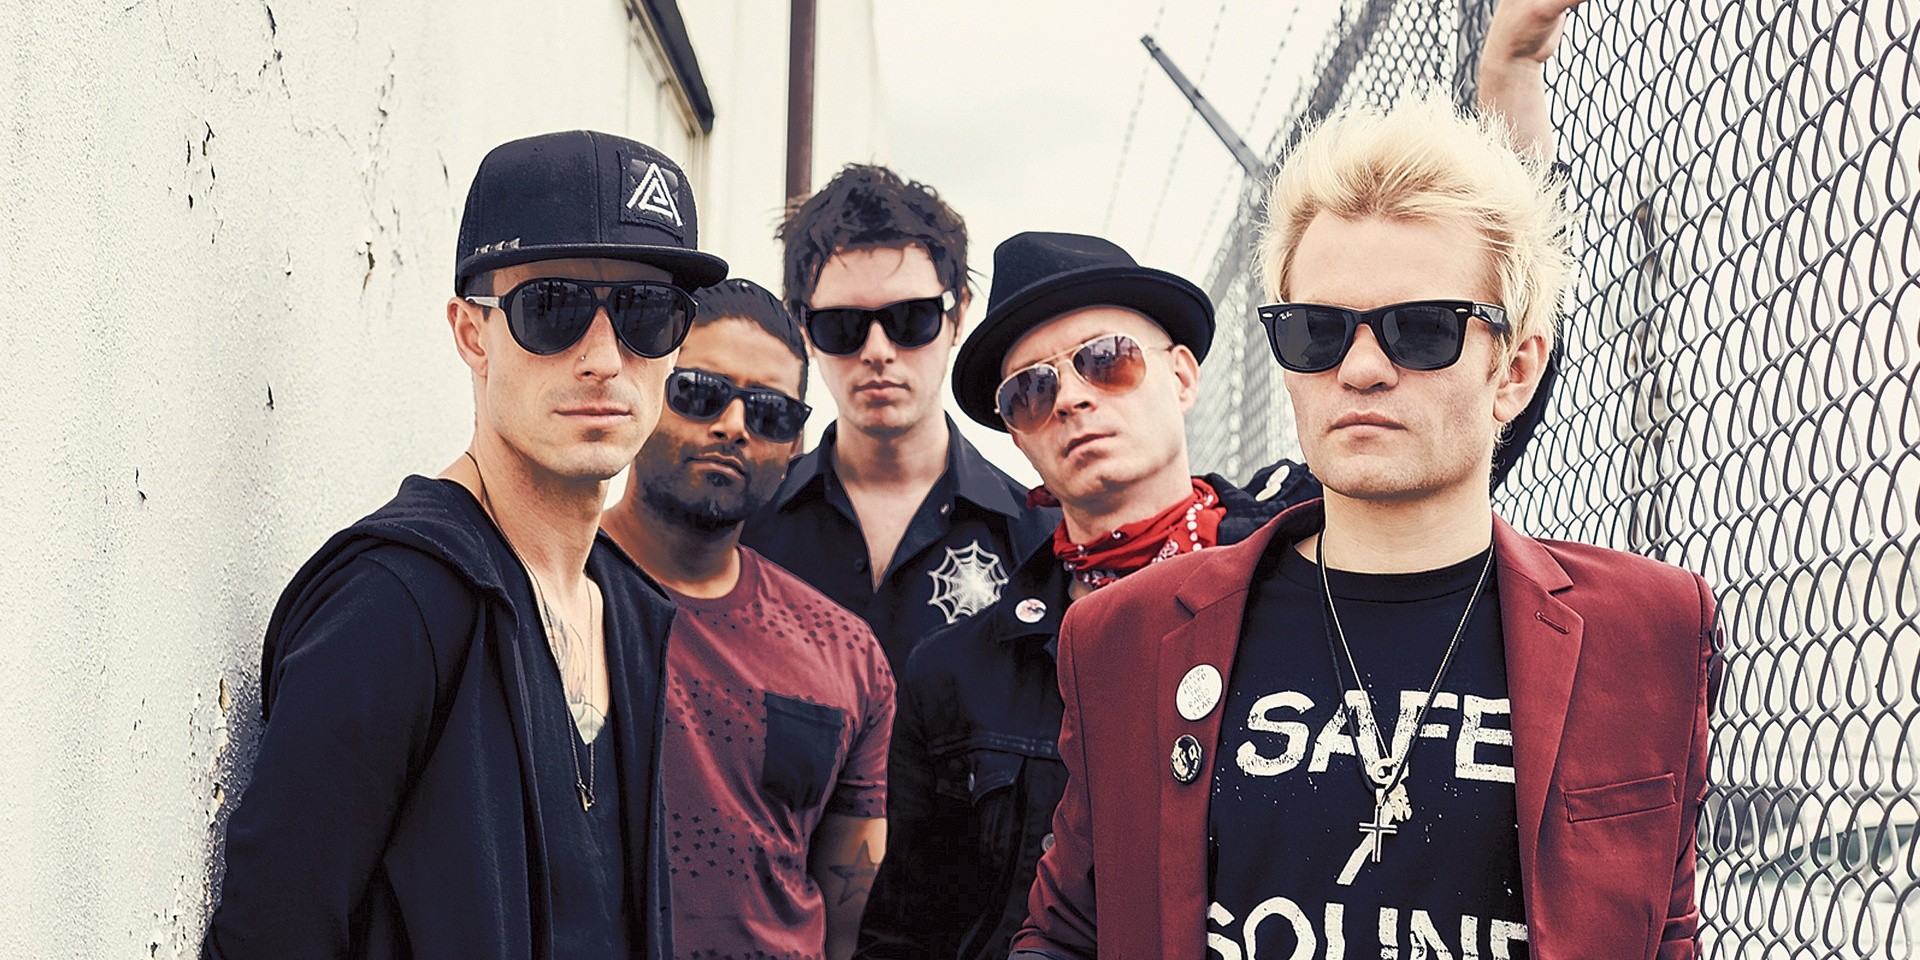 Sum 41 announces new album Order In Decline, premieres music video for new song ‘Out For Blood’ – watch